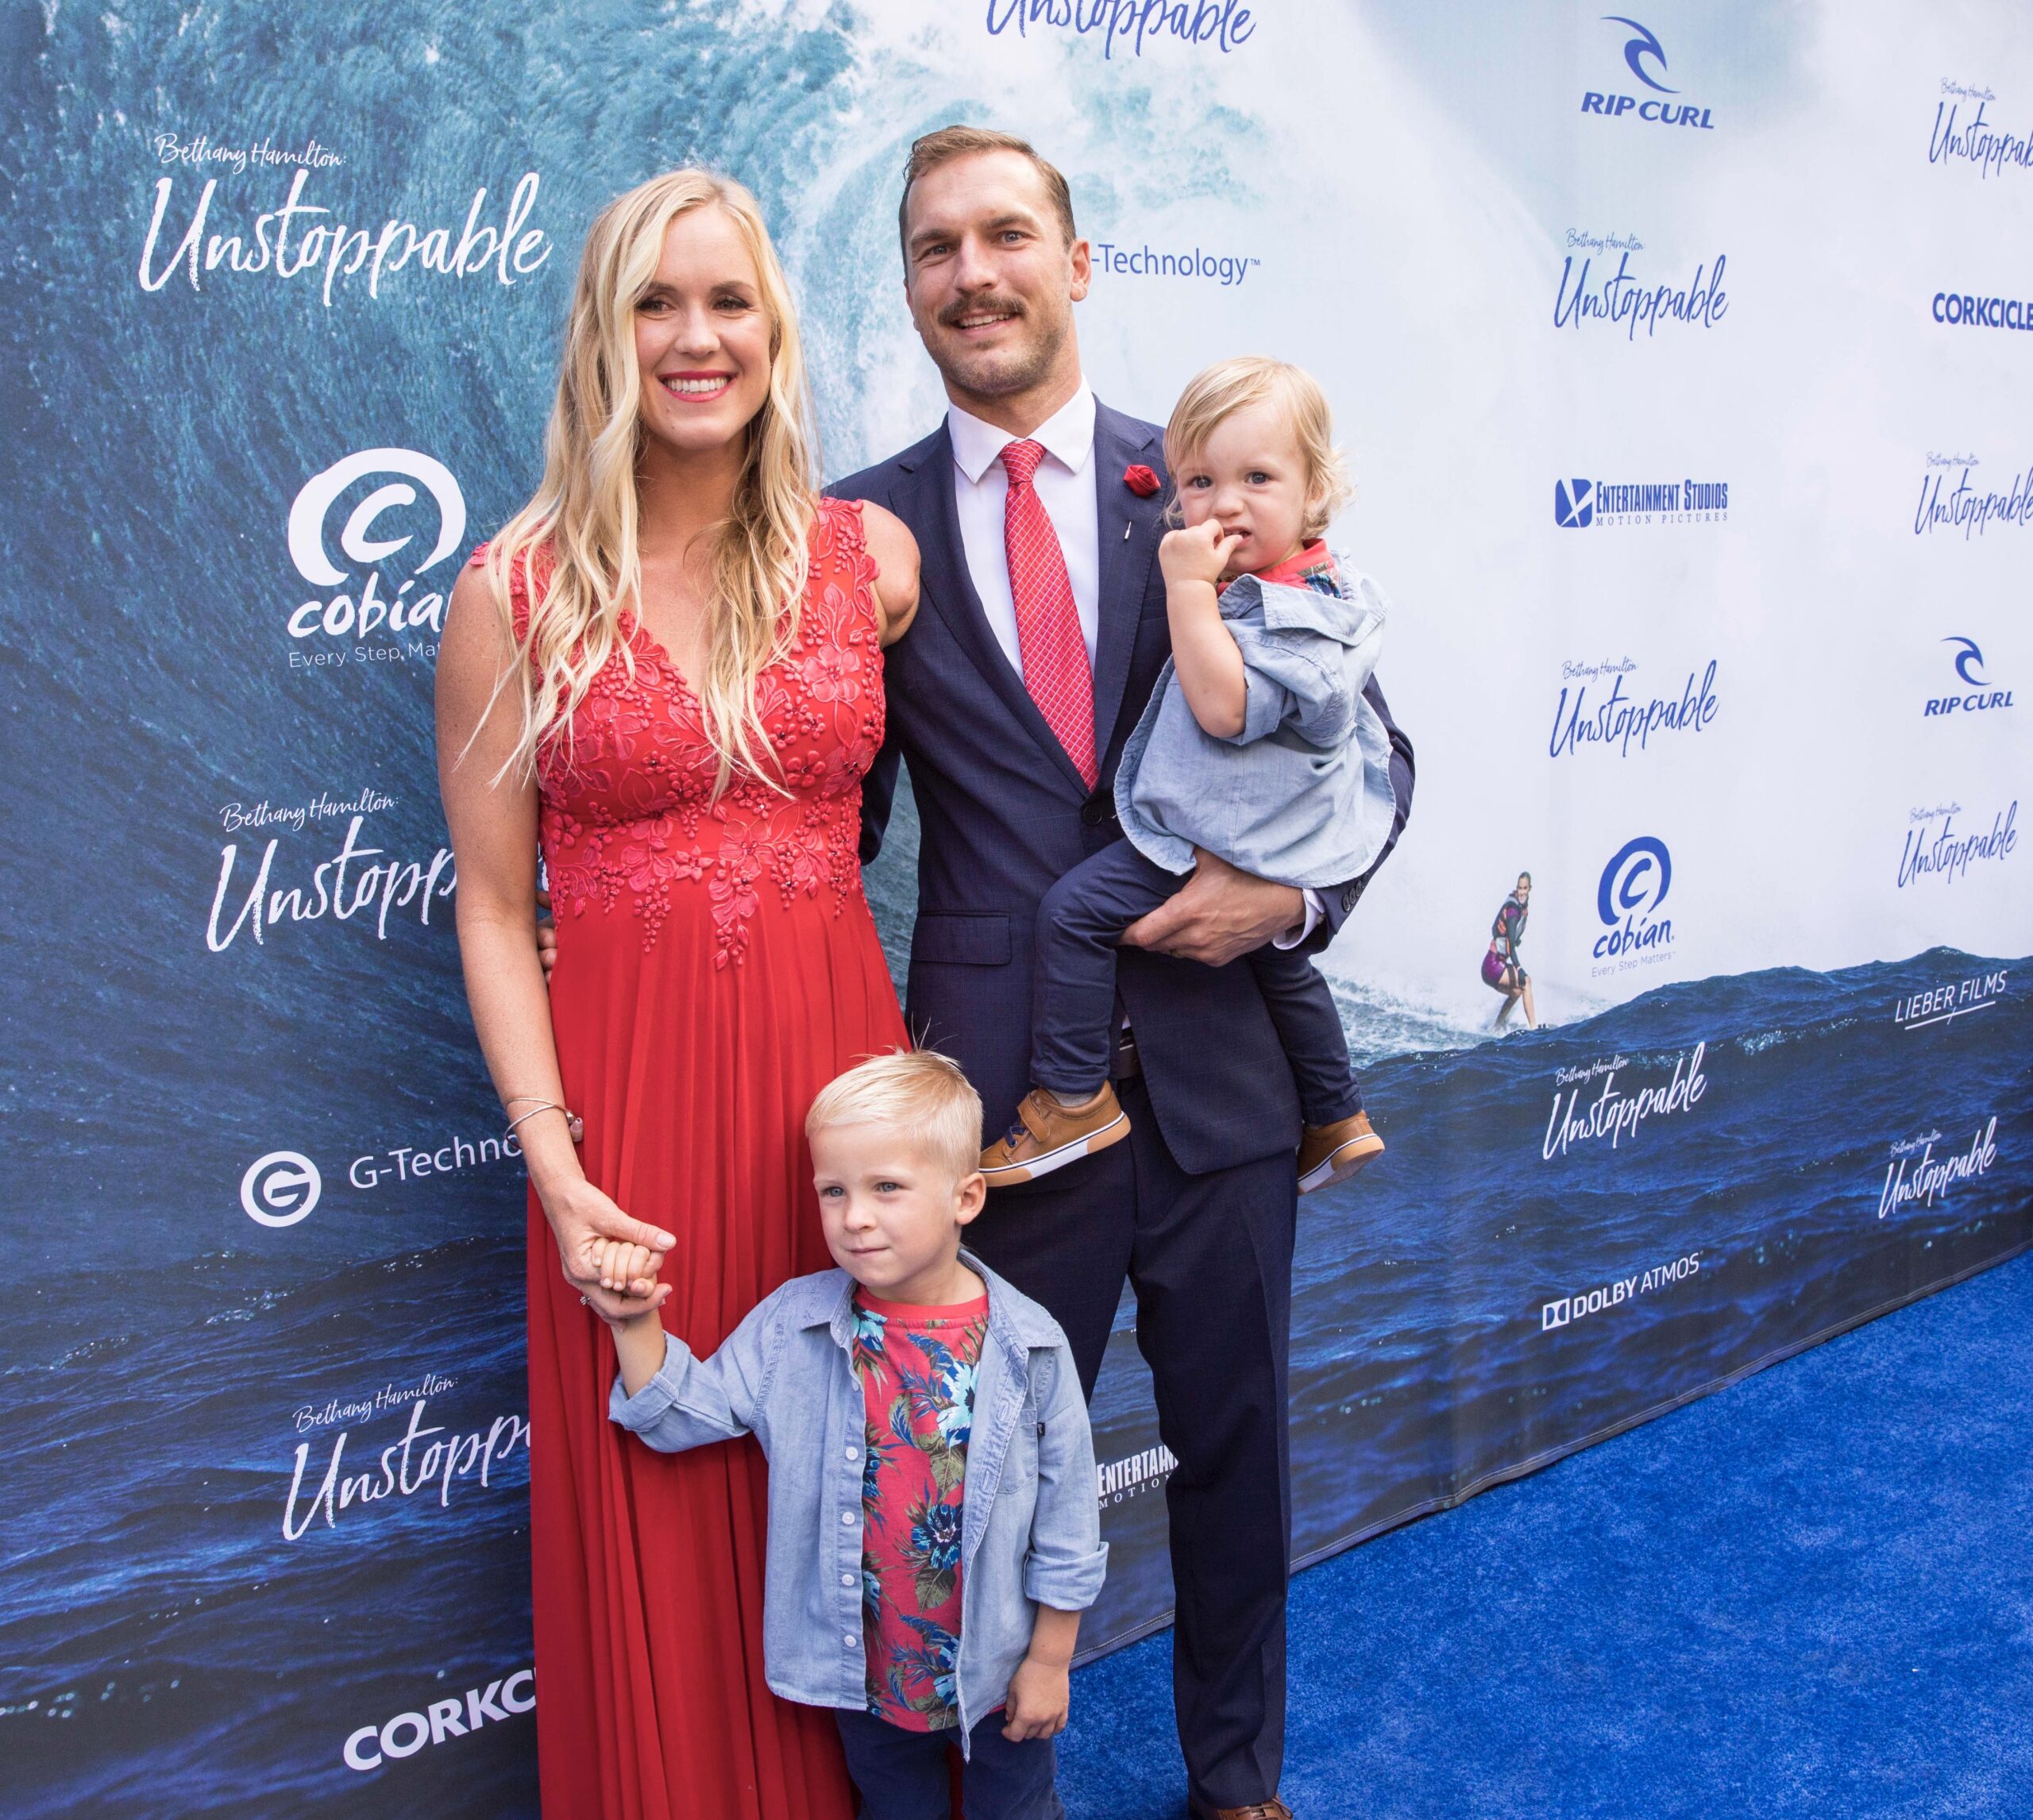 Bethany & her family smile at the Unstoppable Premier